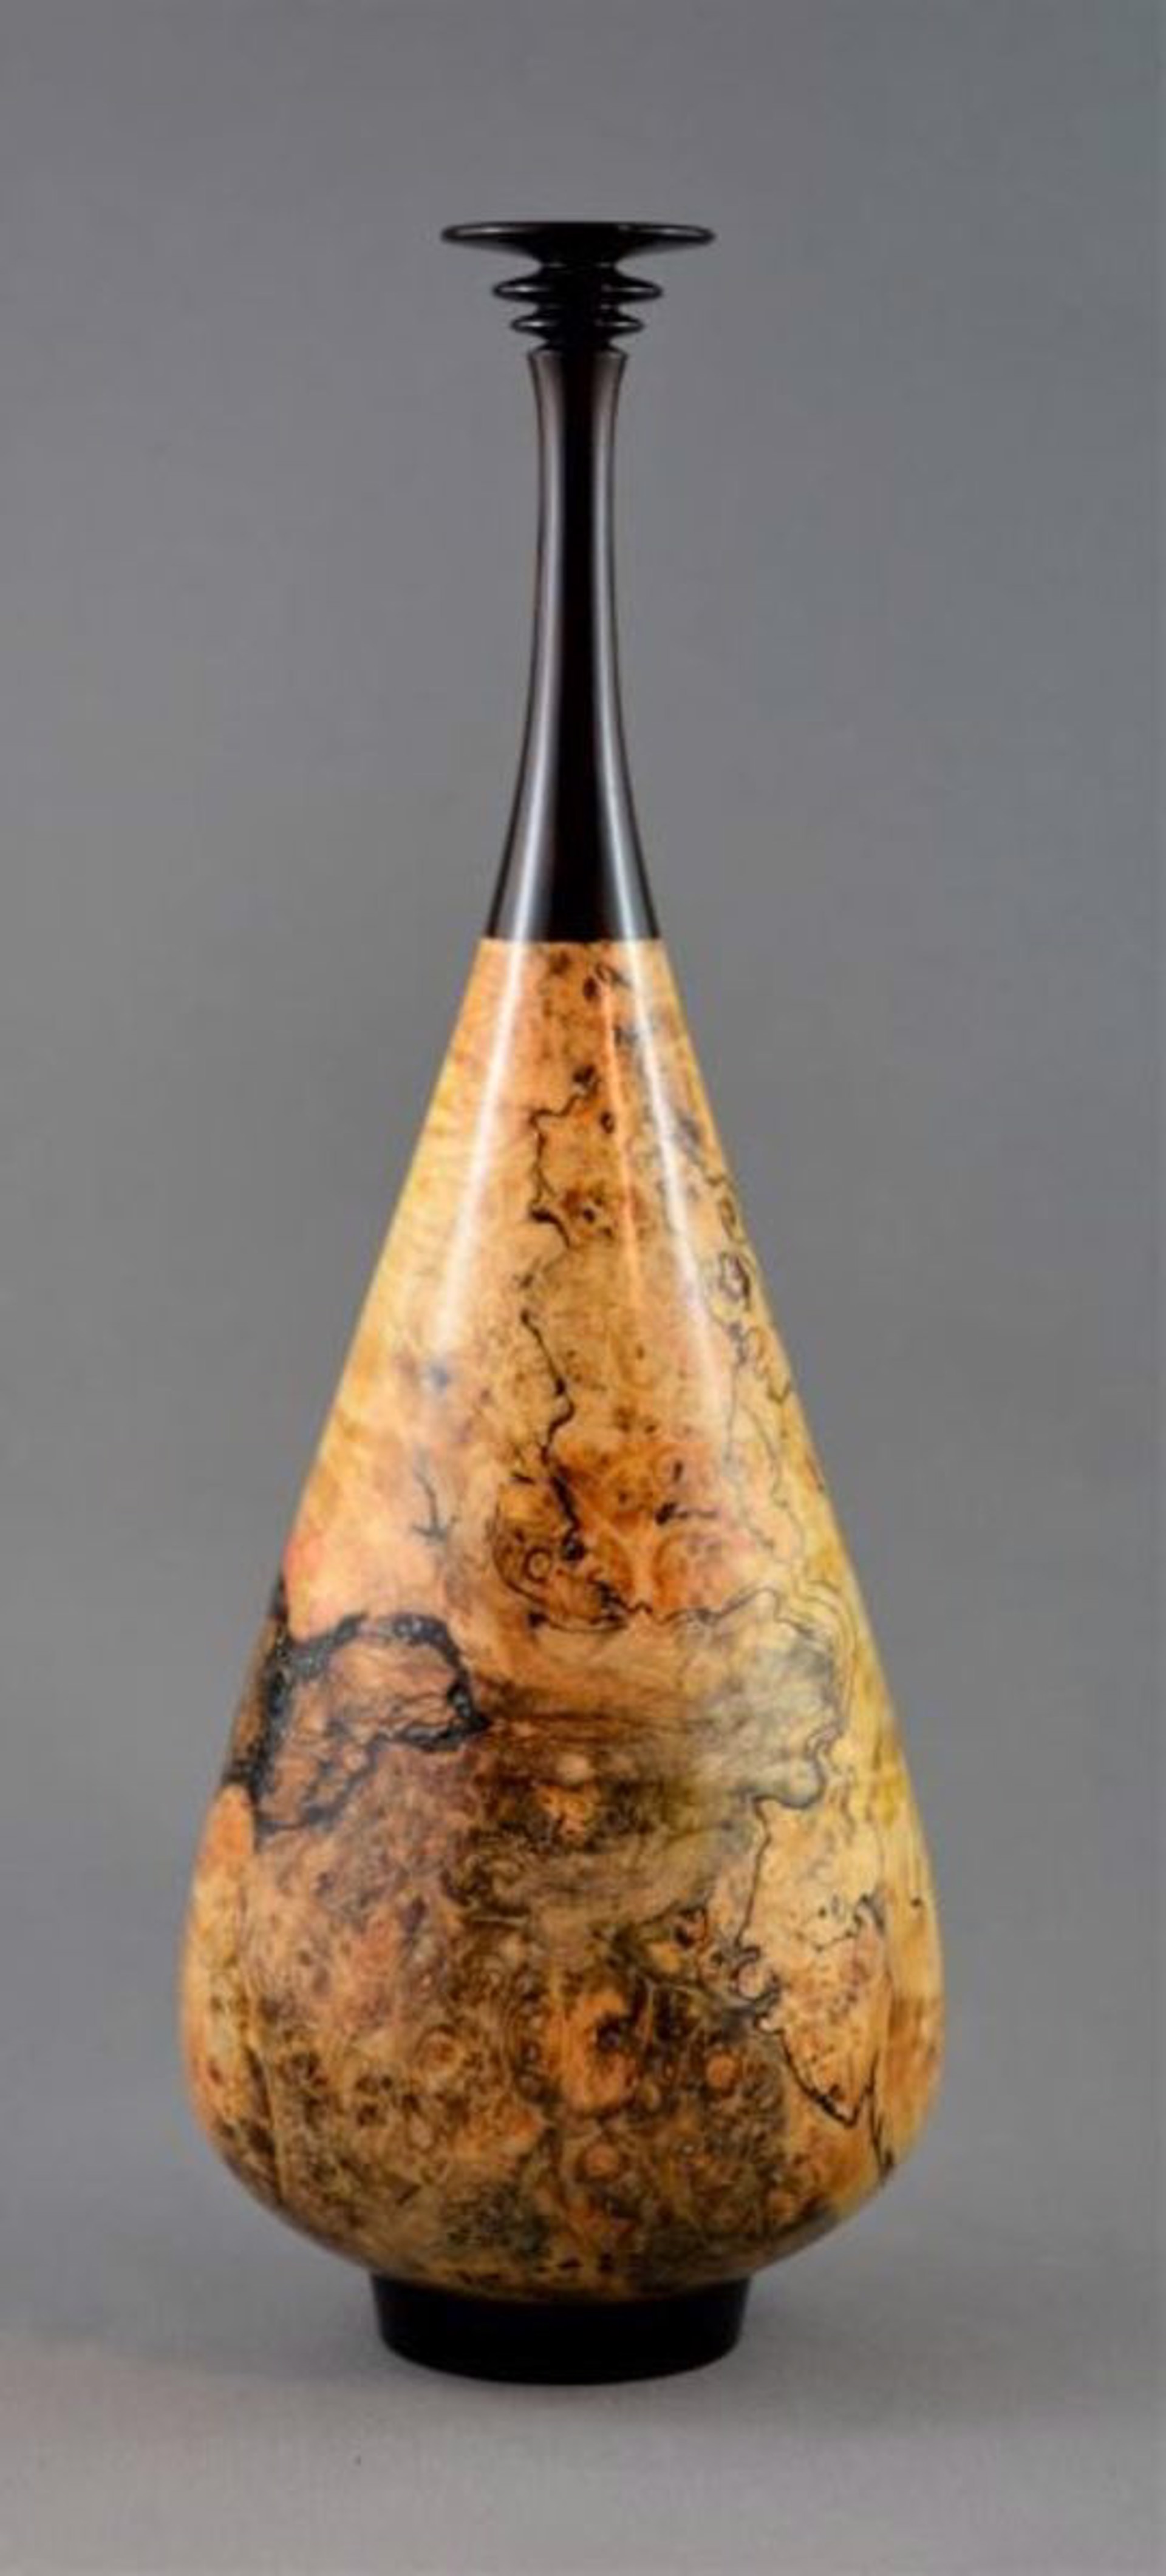 Blackwood and Spalted Maple Burl Vase by Paul Gray Diamond